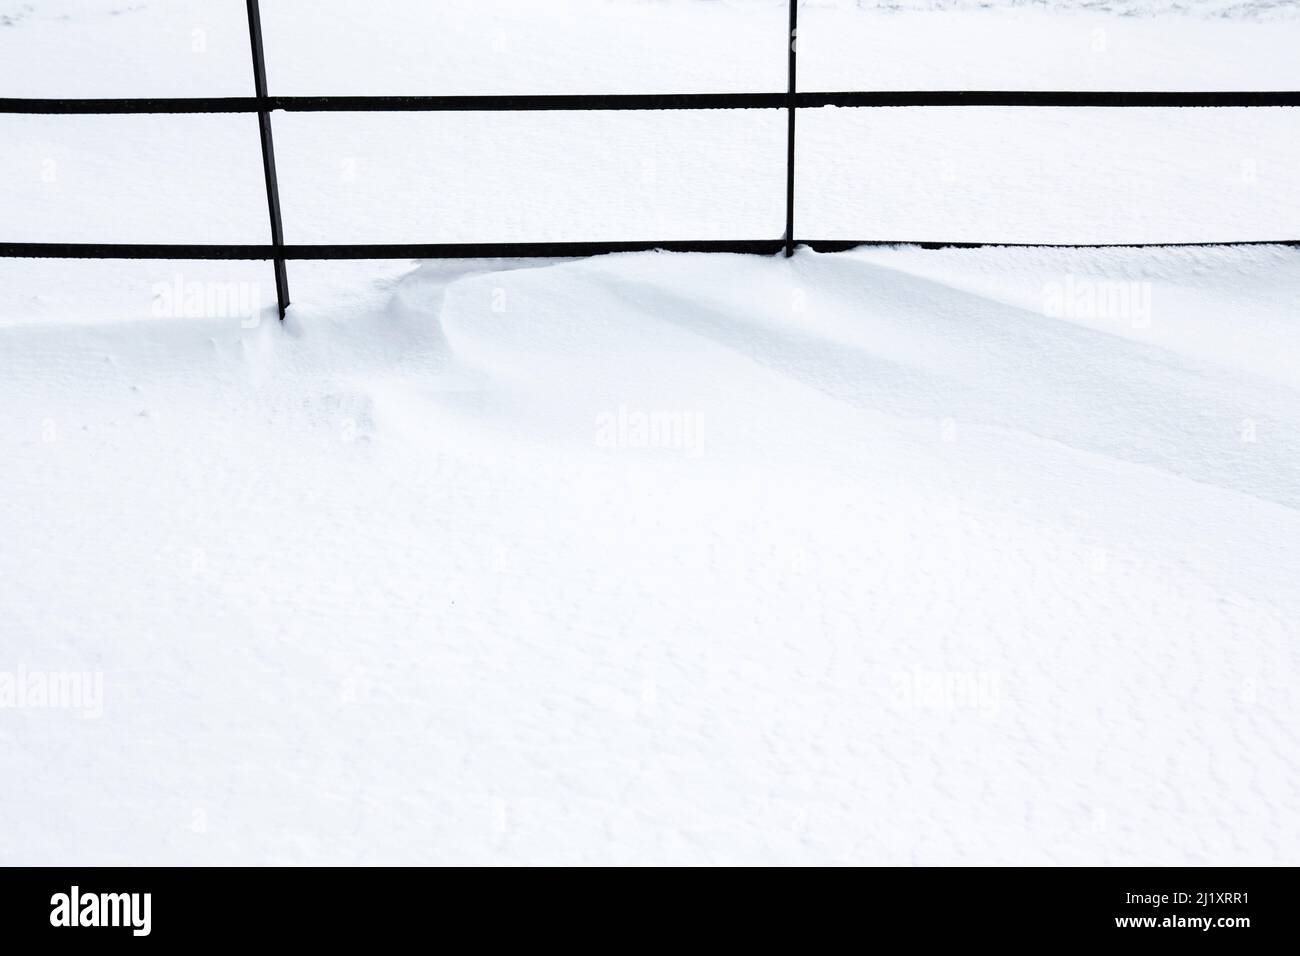 A metal fence partially buried under mounds of drifting snow. Stock Photo